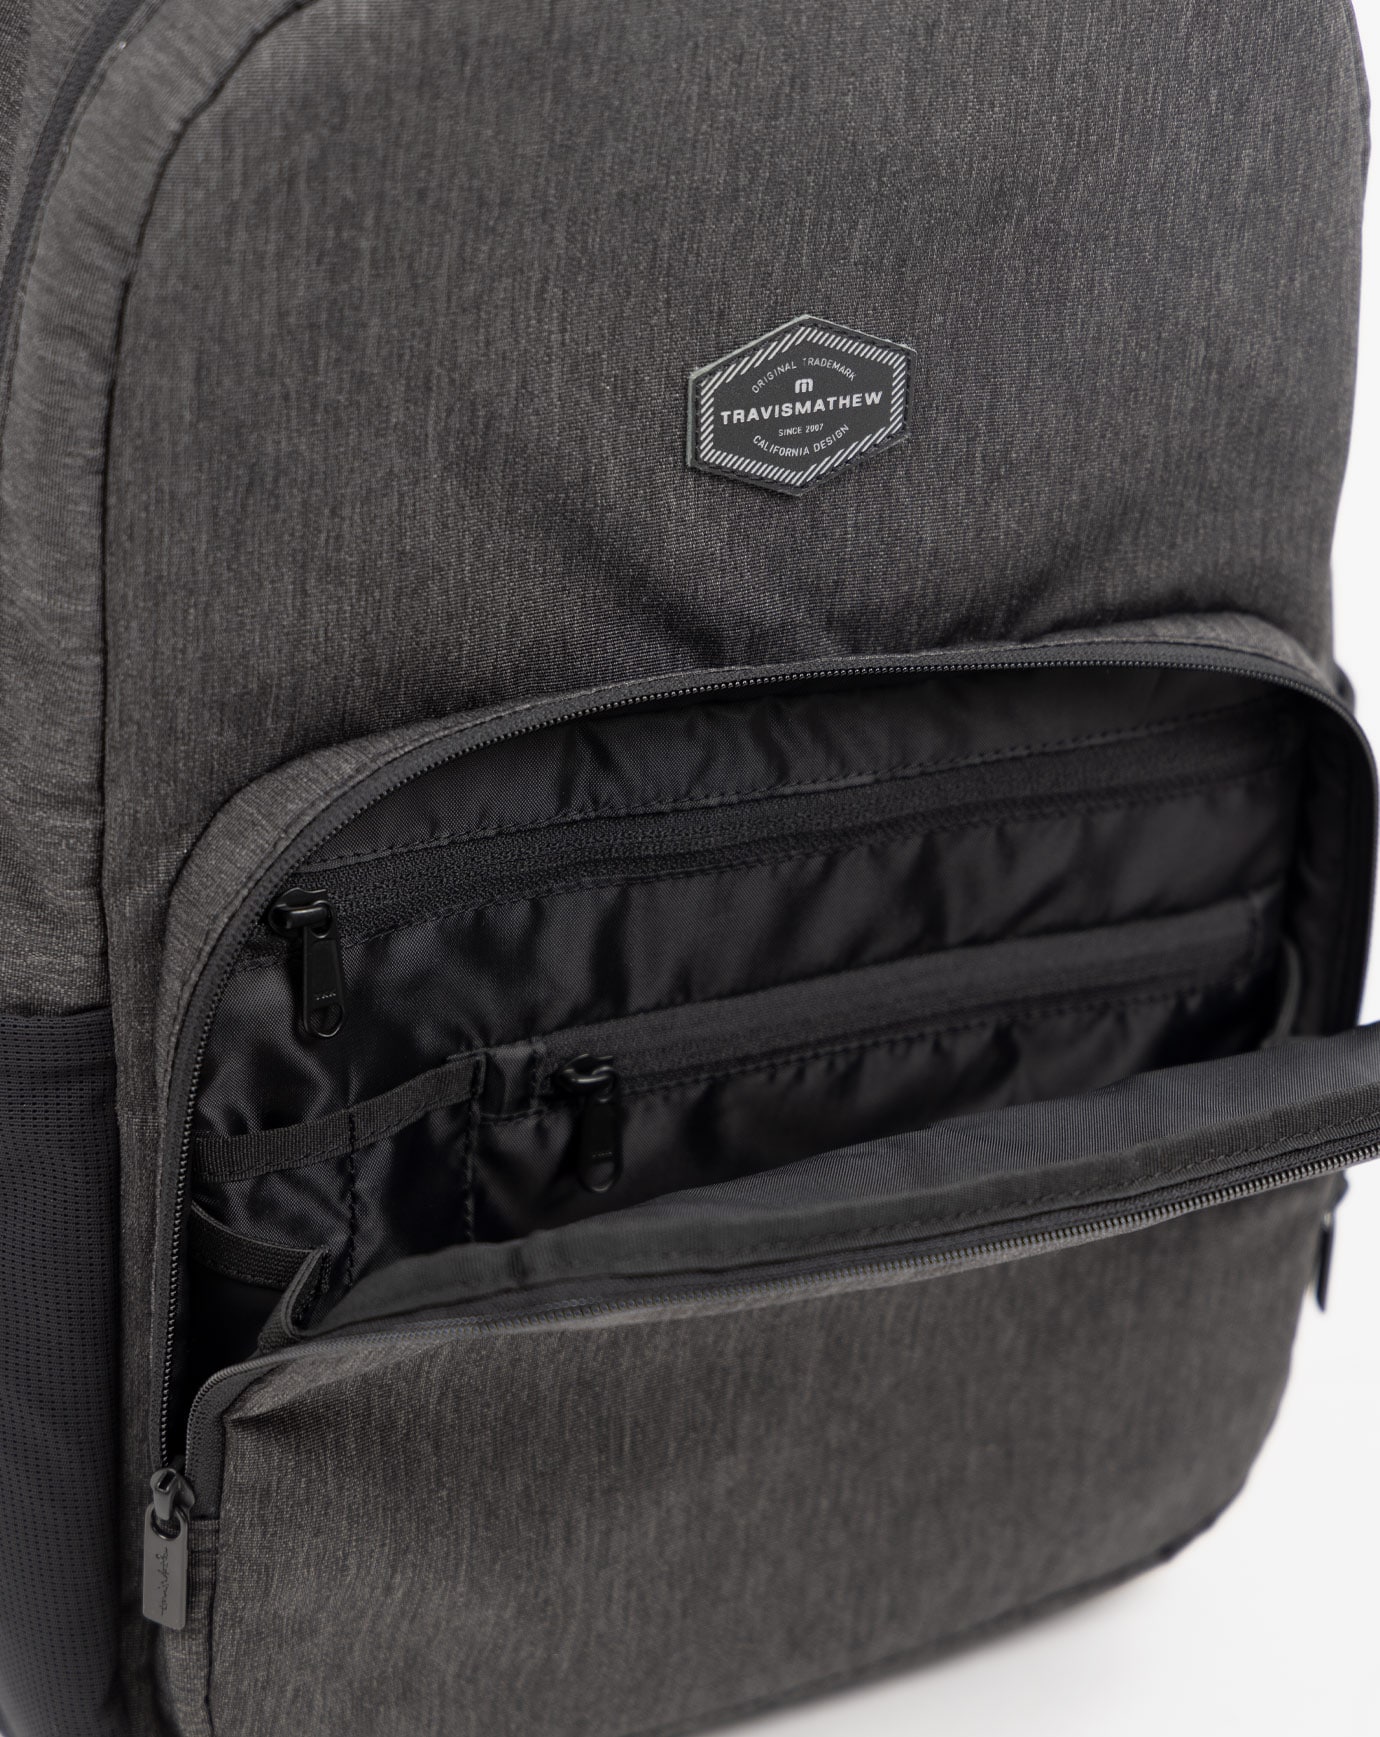 STEADYPACK BACKPACK Image Thumbnail 5